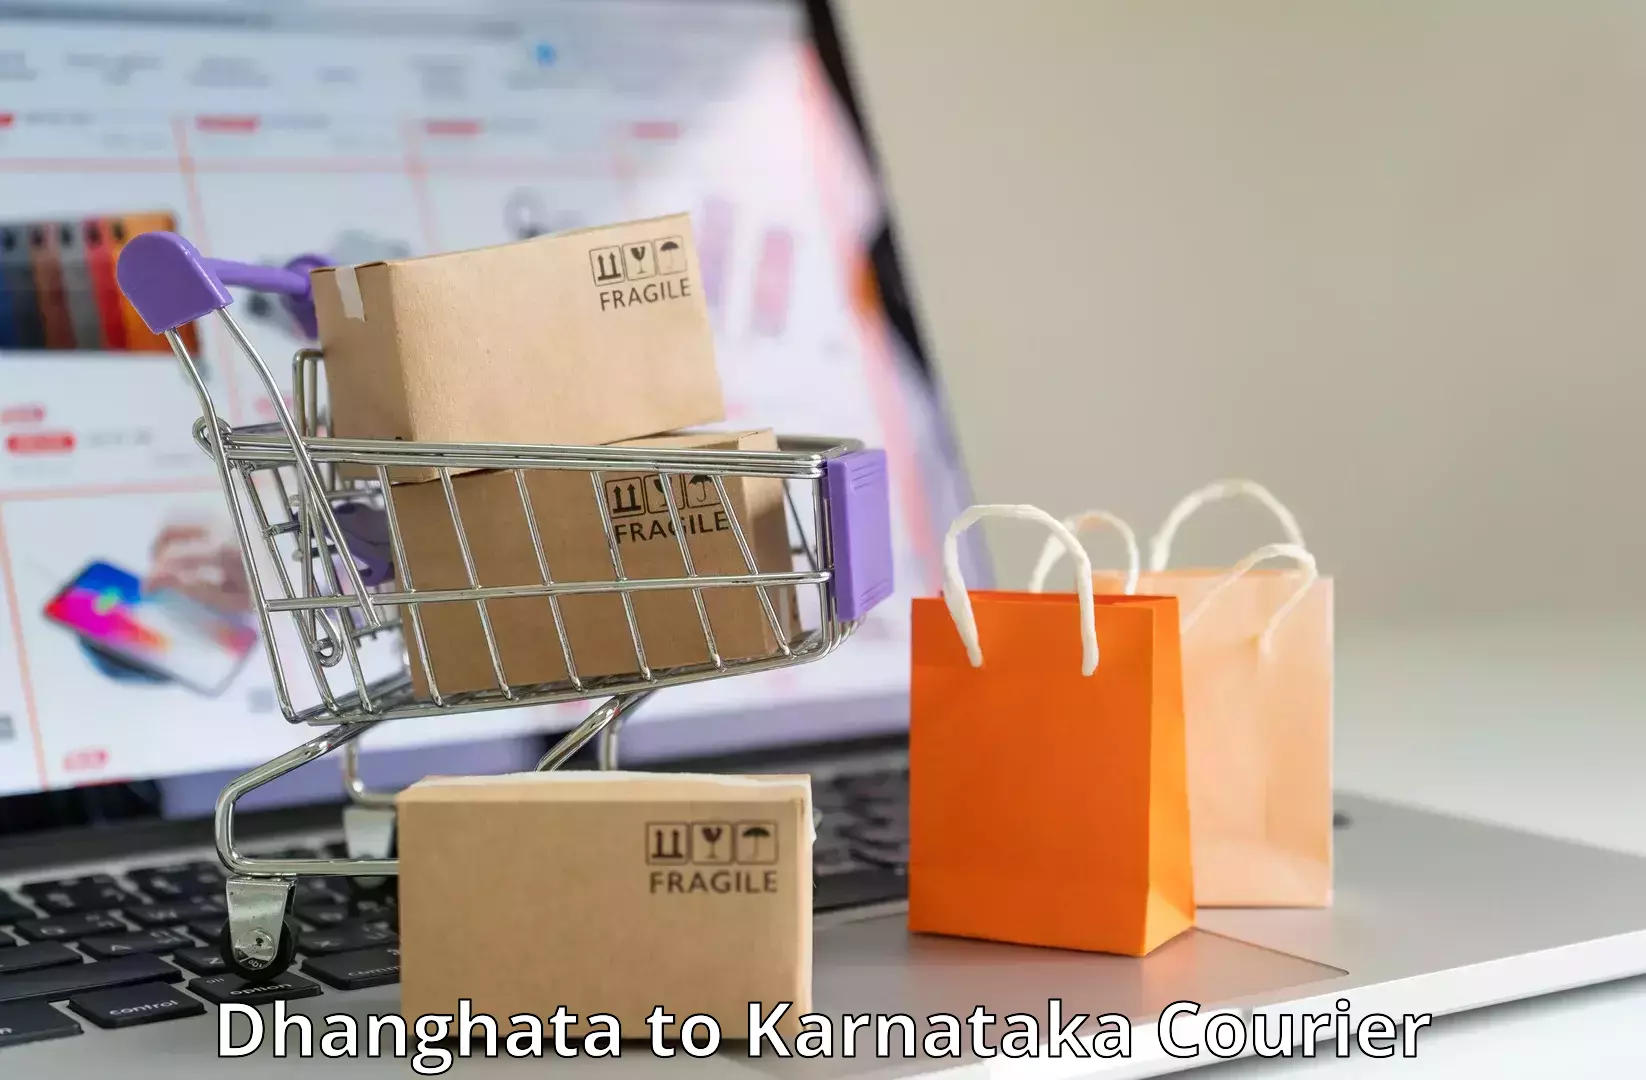 State-of-the-art courier technology Dhanghata to Afzalpur